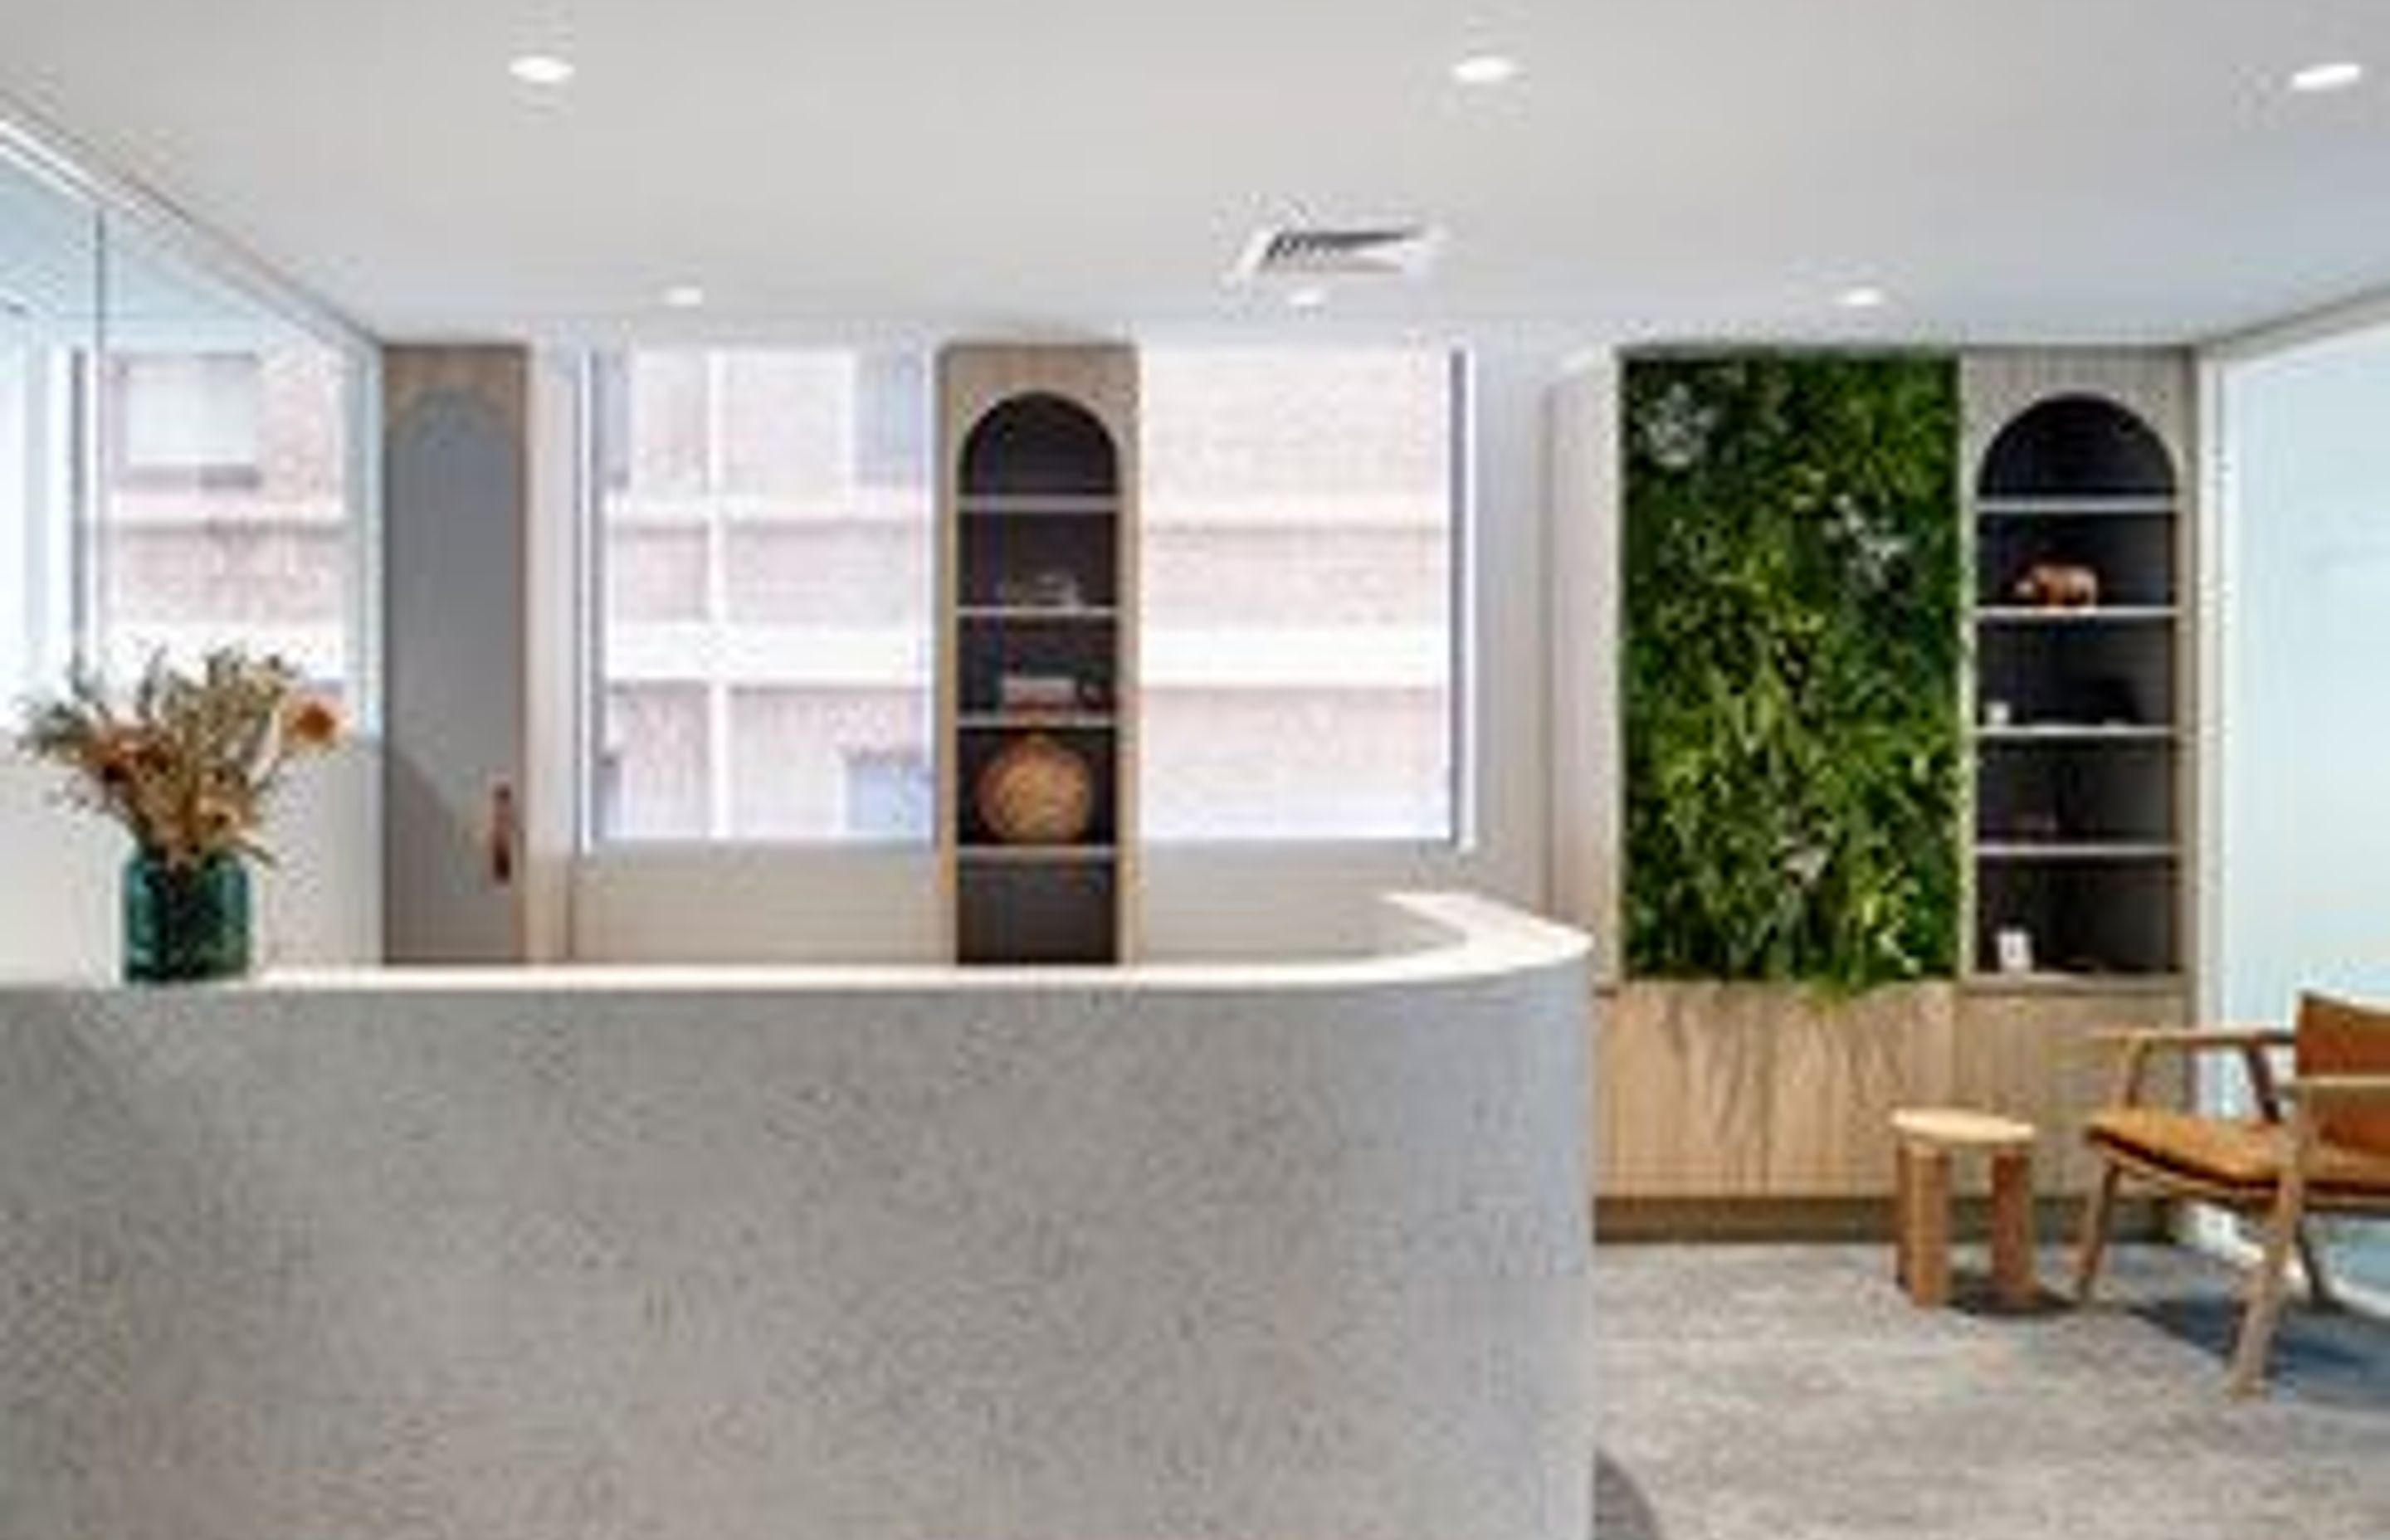 KHID Shortlisted for three Interior Design Excellence Awards (IDEA) 2020